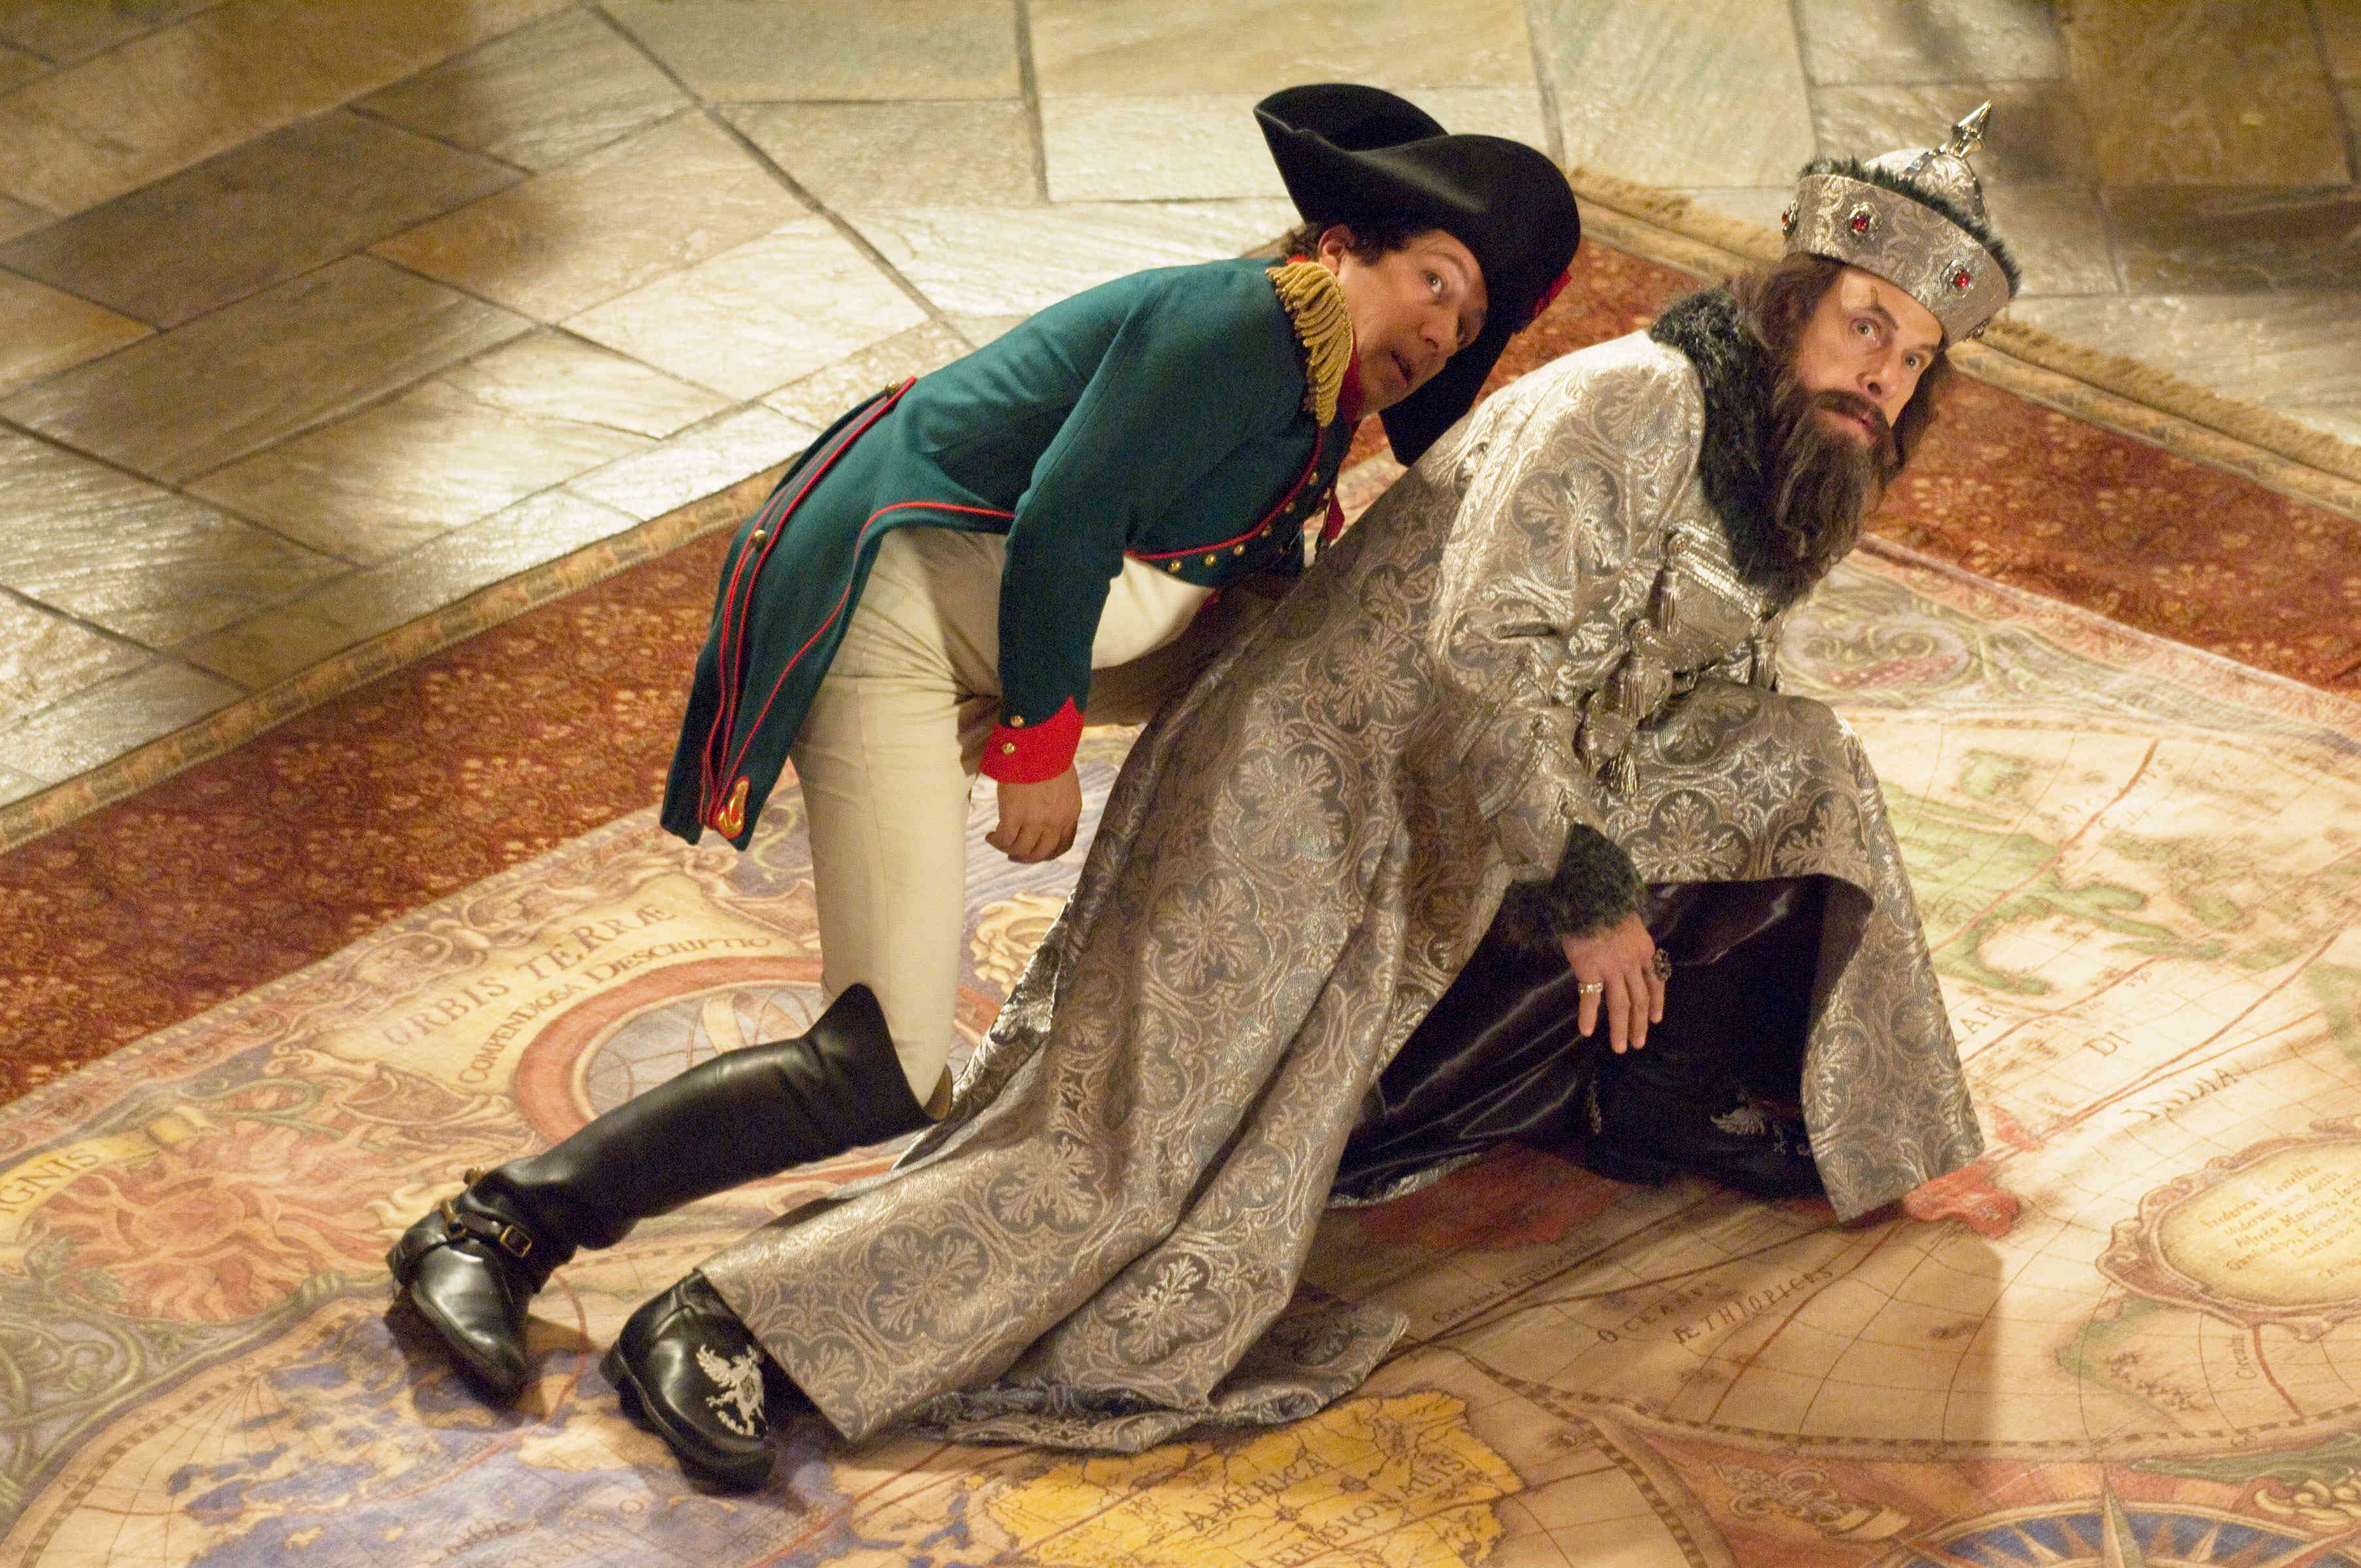 Alain Chabat stars as Napoleon and Christopher Guest stars as Ivan the Terrible in 20th Century Fox's Night at the Museum 2: Battle of the Smithsonian (2009)